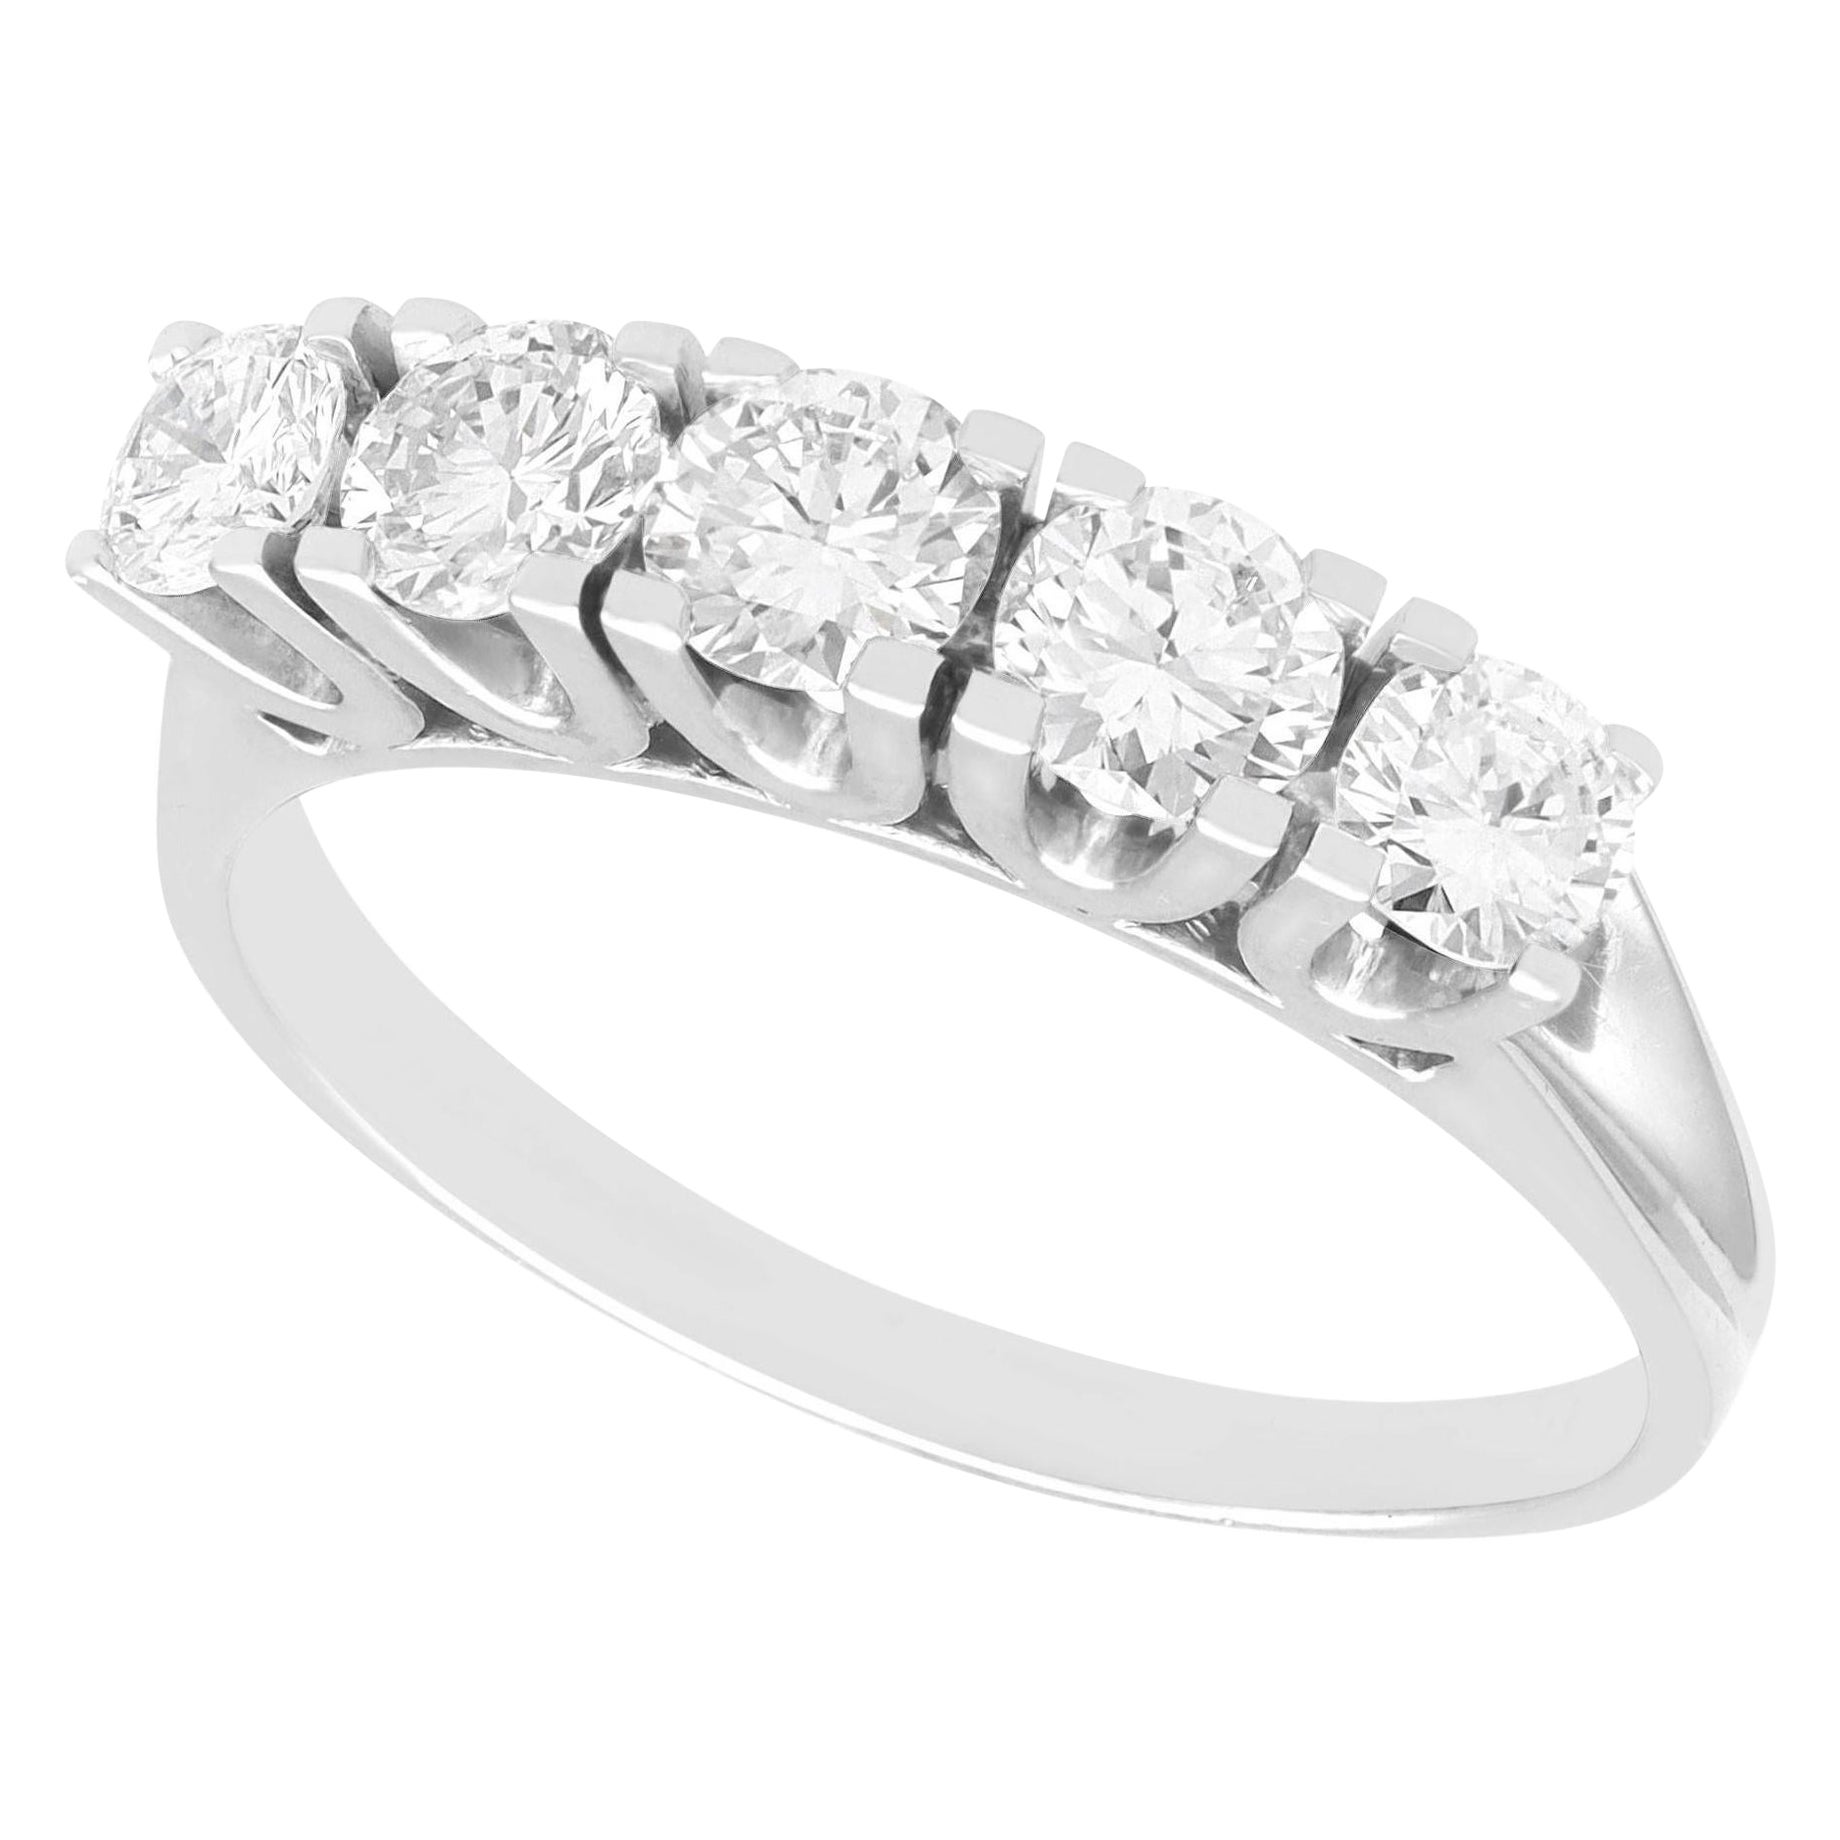 Vintage 1.46 Carat Diamond and White Gold Five Stone Ring